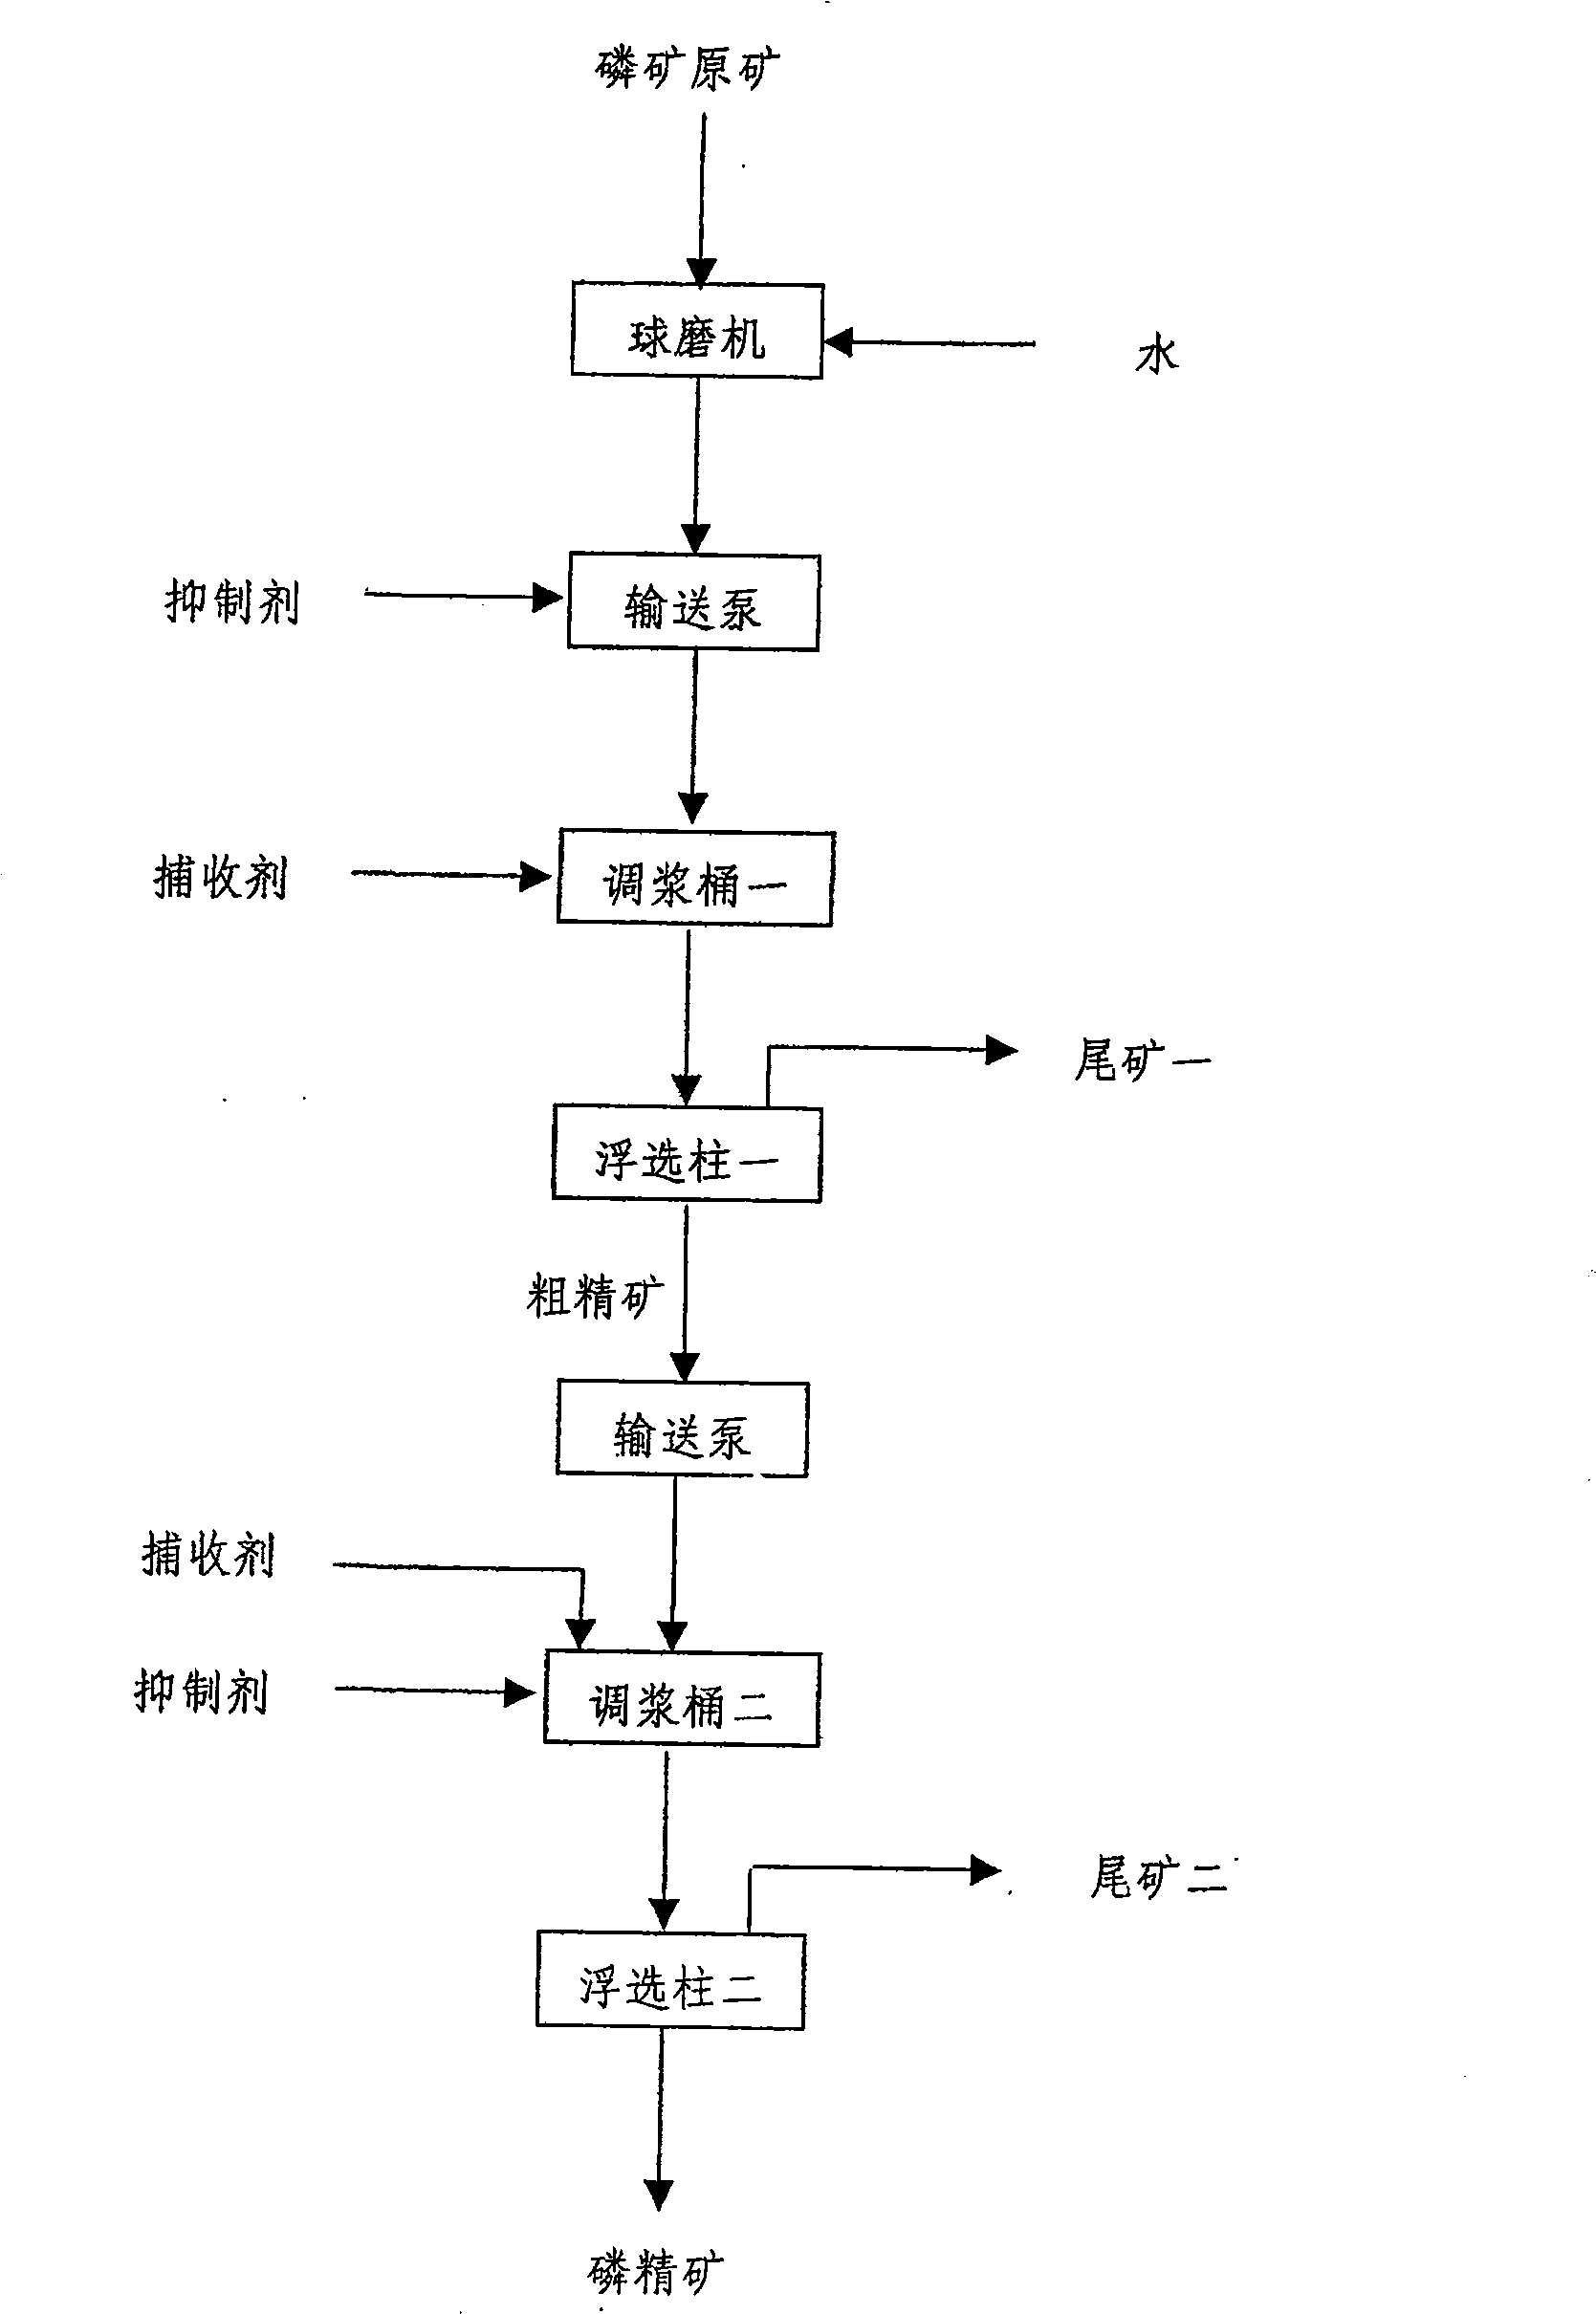 Method for demagging from phosphate ore